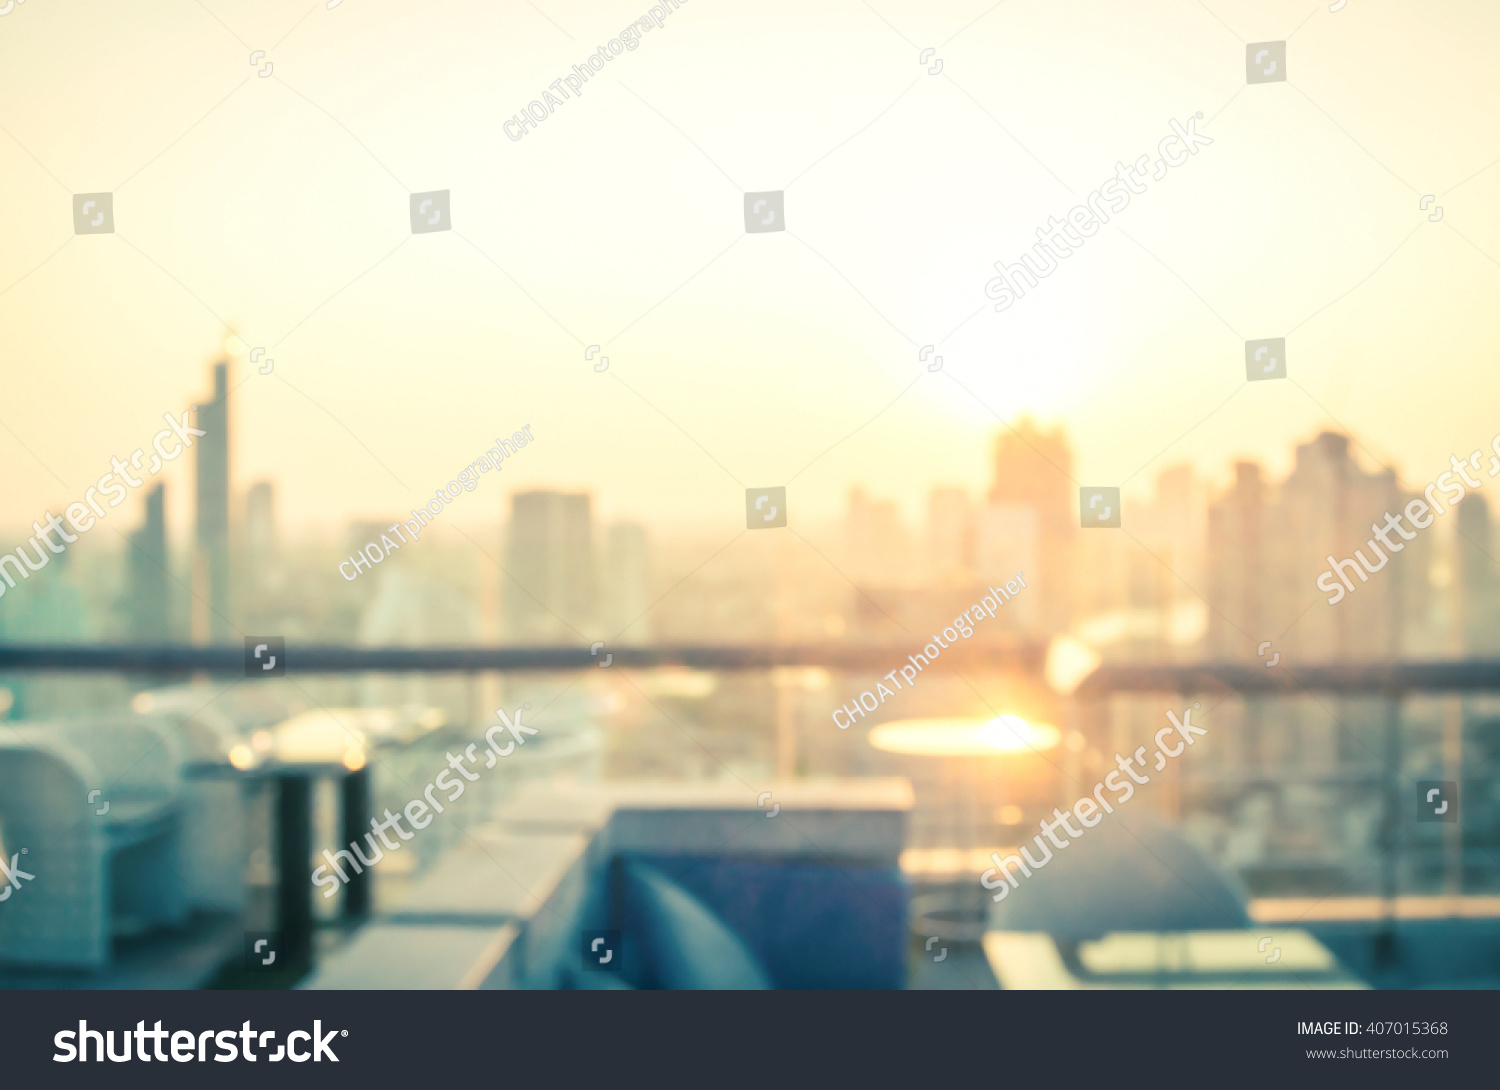 Rooftop party concept: Blurred dining table restaurant with beautiful city view at twilight scene background. Bangkok, Thailand, Asia #407015368